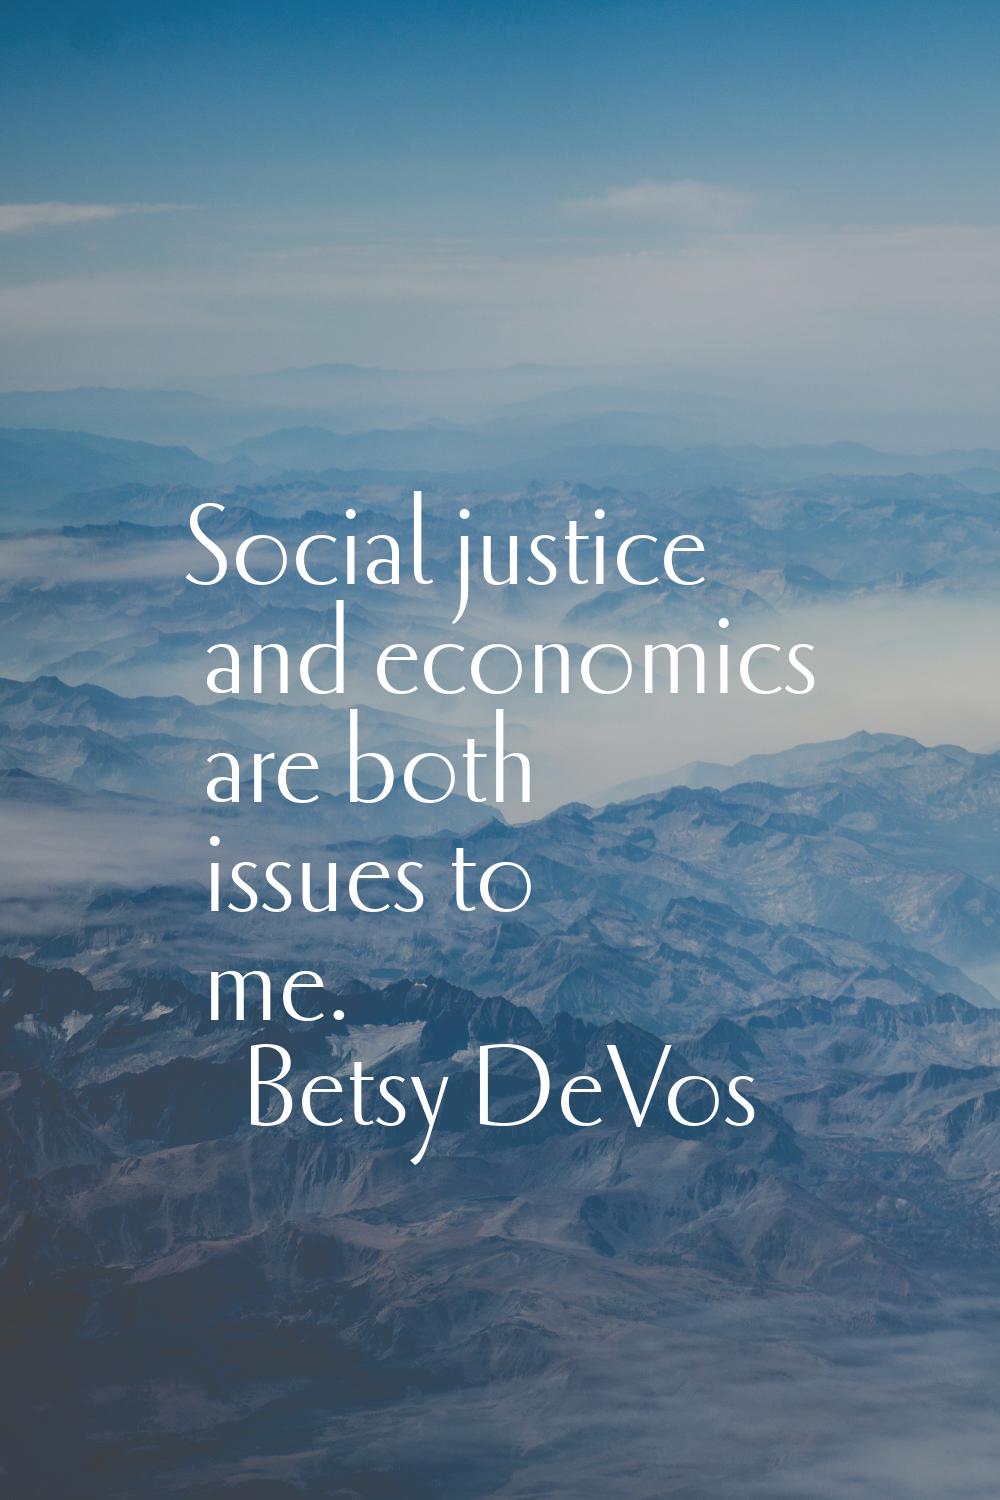 Social justice and economics are both issues to me.